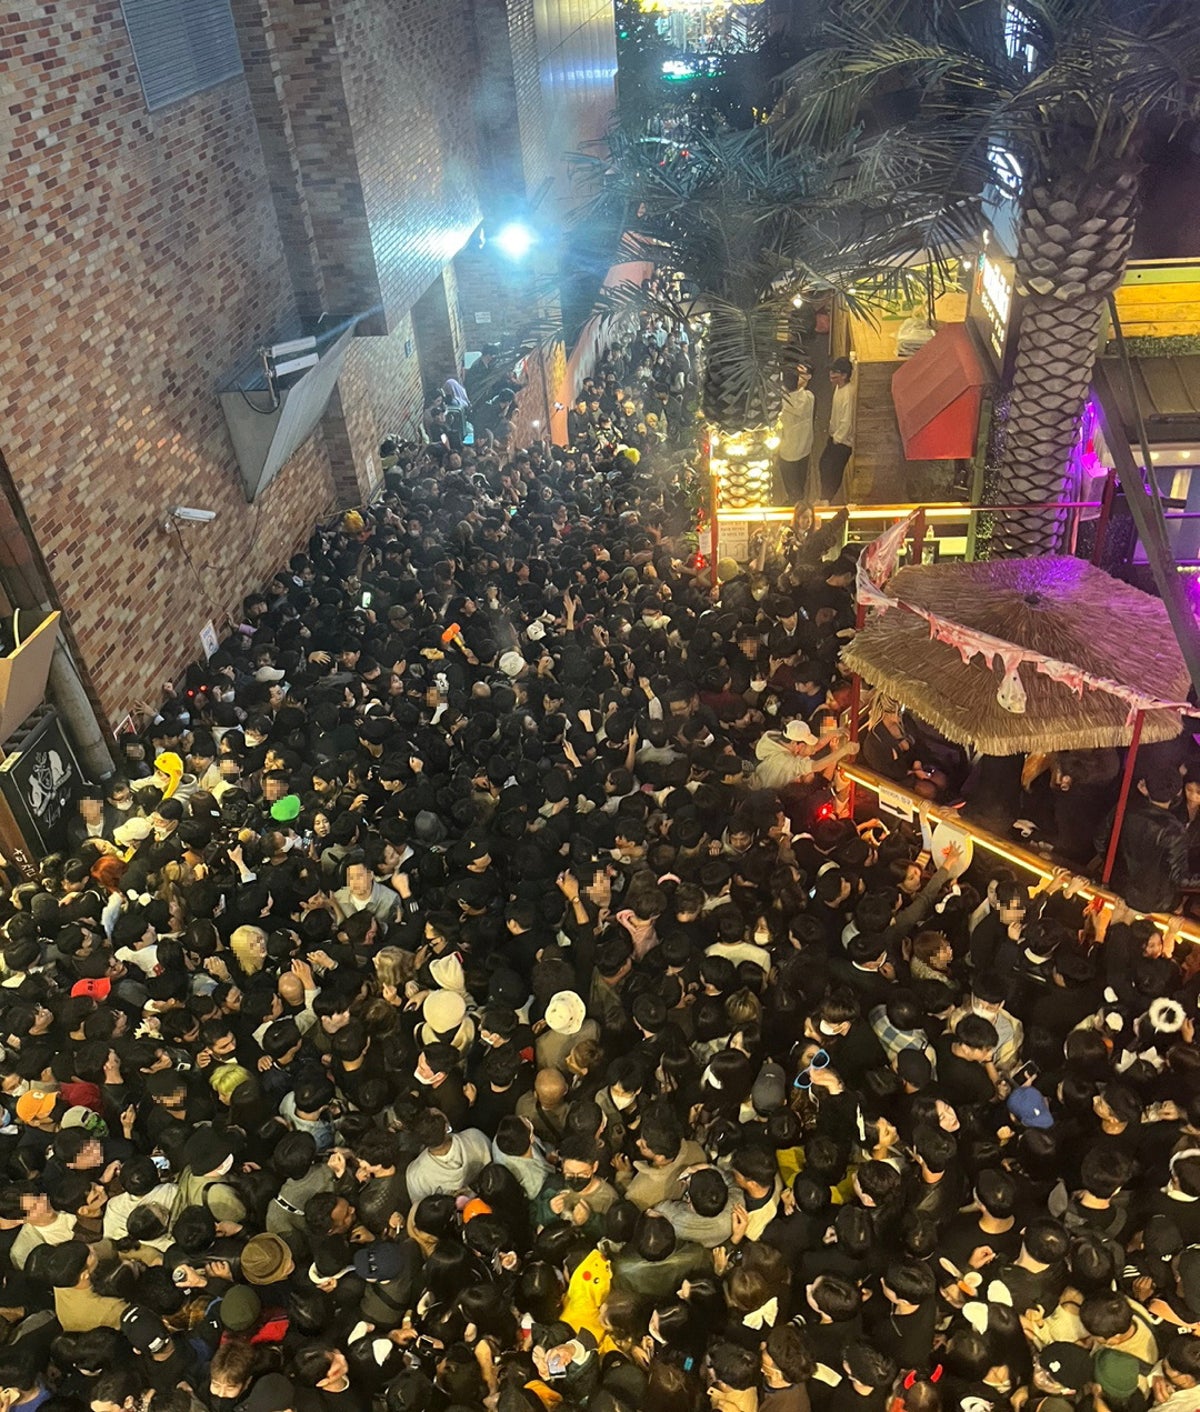 Footage inside Seoul crowd reveals partygoers’ panic before crush that killed 153 people